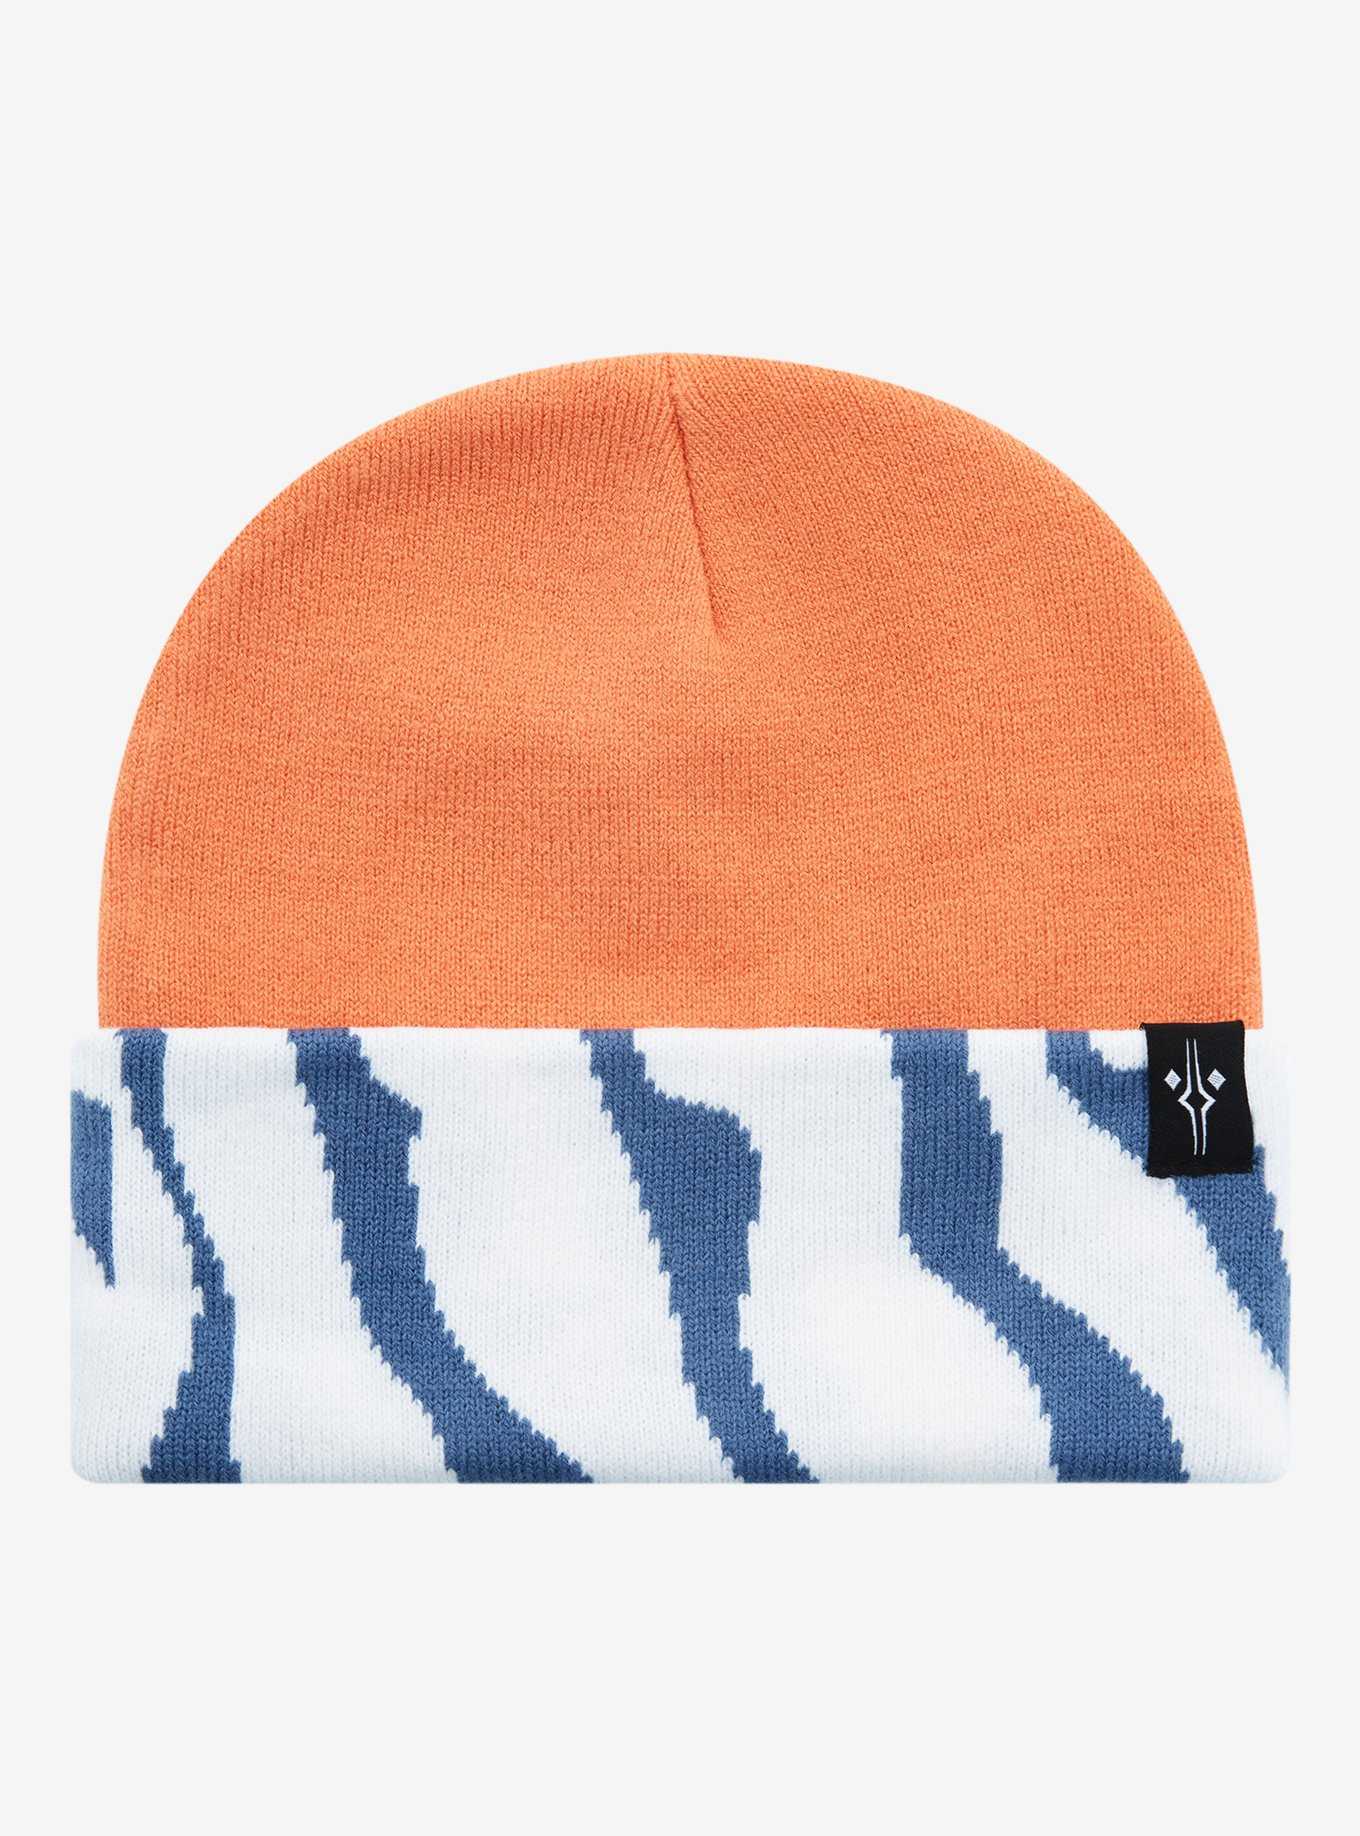 Cool Trendy & | Slouchy, Beanies Culture Beanies: BoxLunch Pop